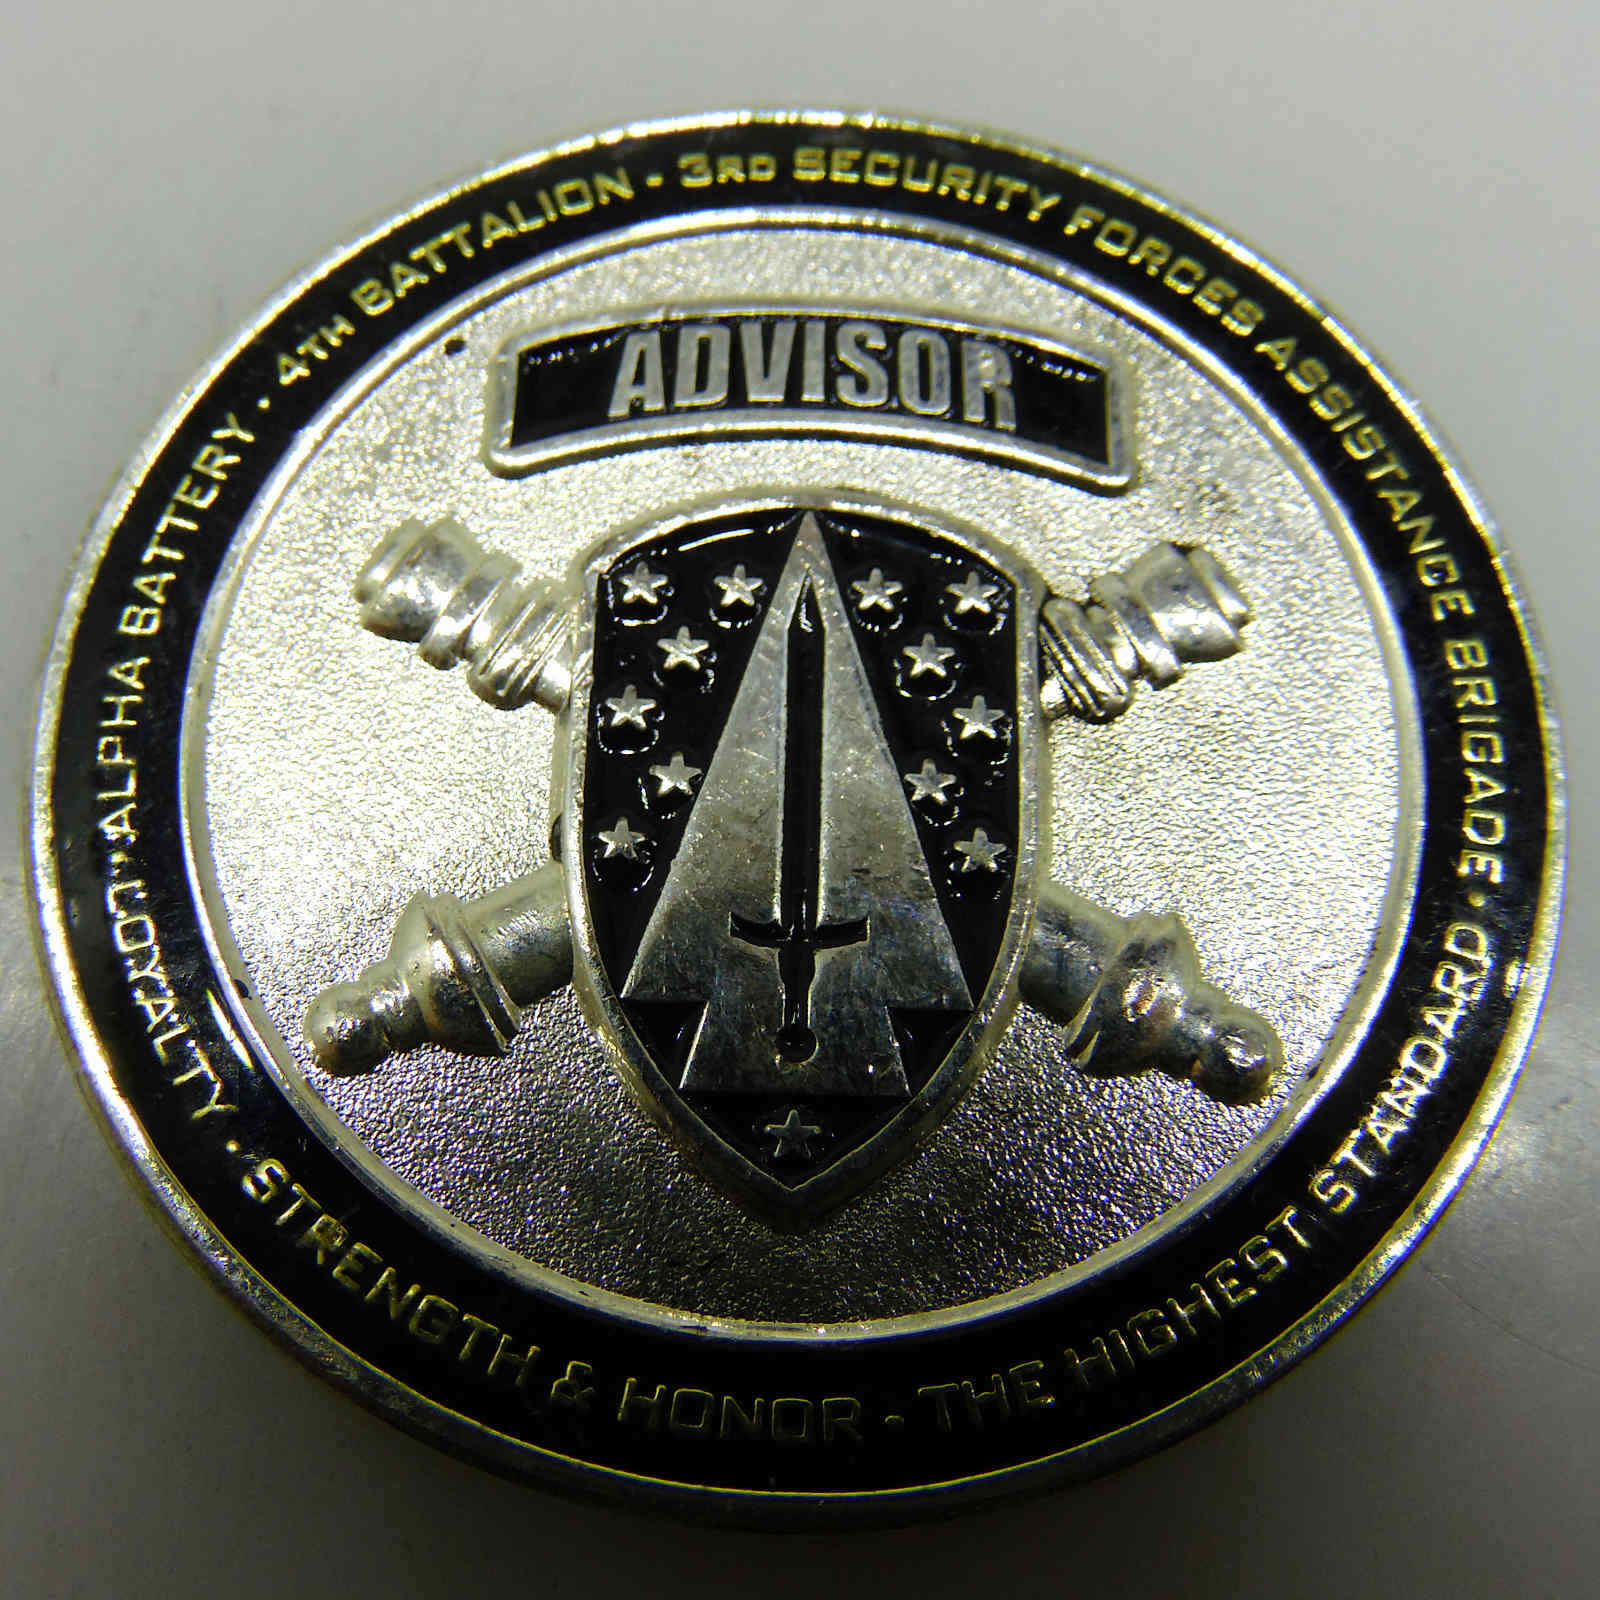 4TH BATTALION 3RD SECURITY FORCES ASSISTANCE BRIGADE ADVISOR CHALLENGE COIN